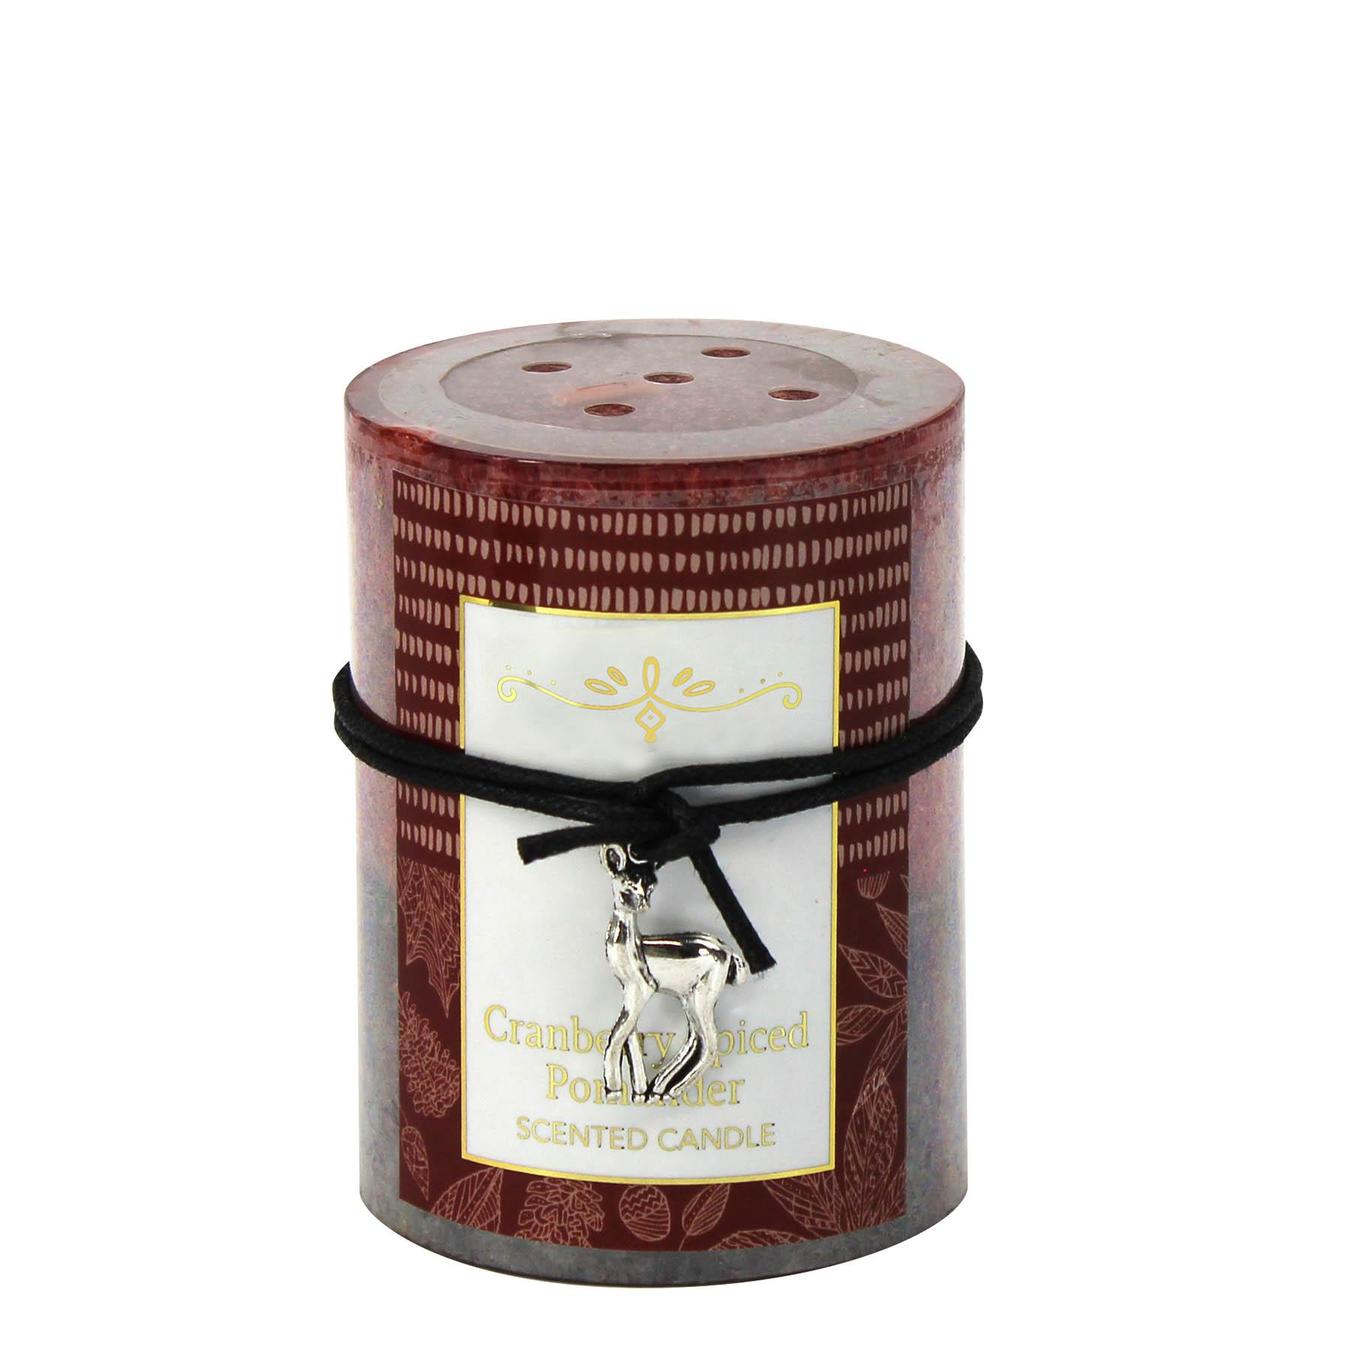 Cranberry Spiced Scented Candle 3X4